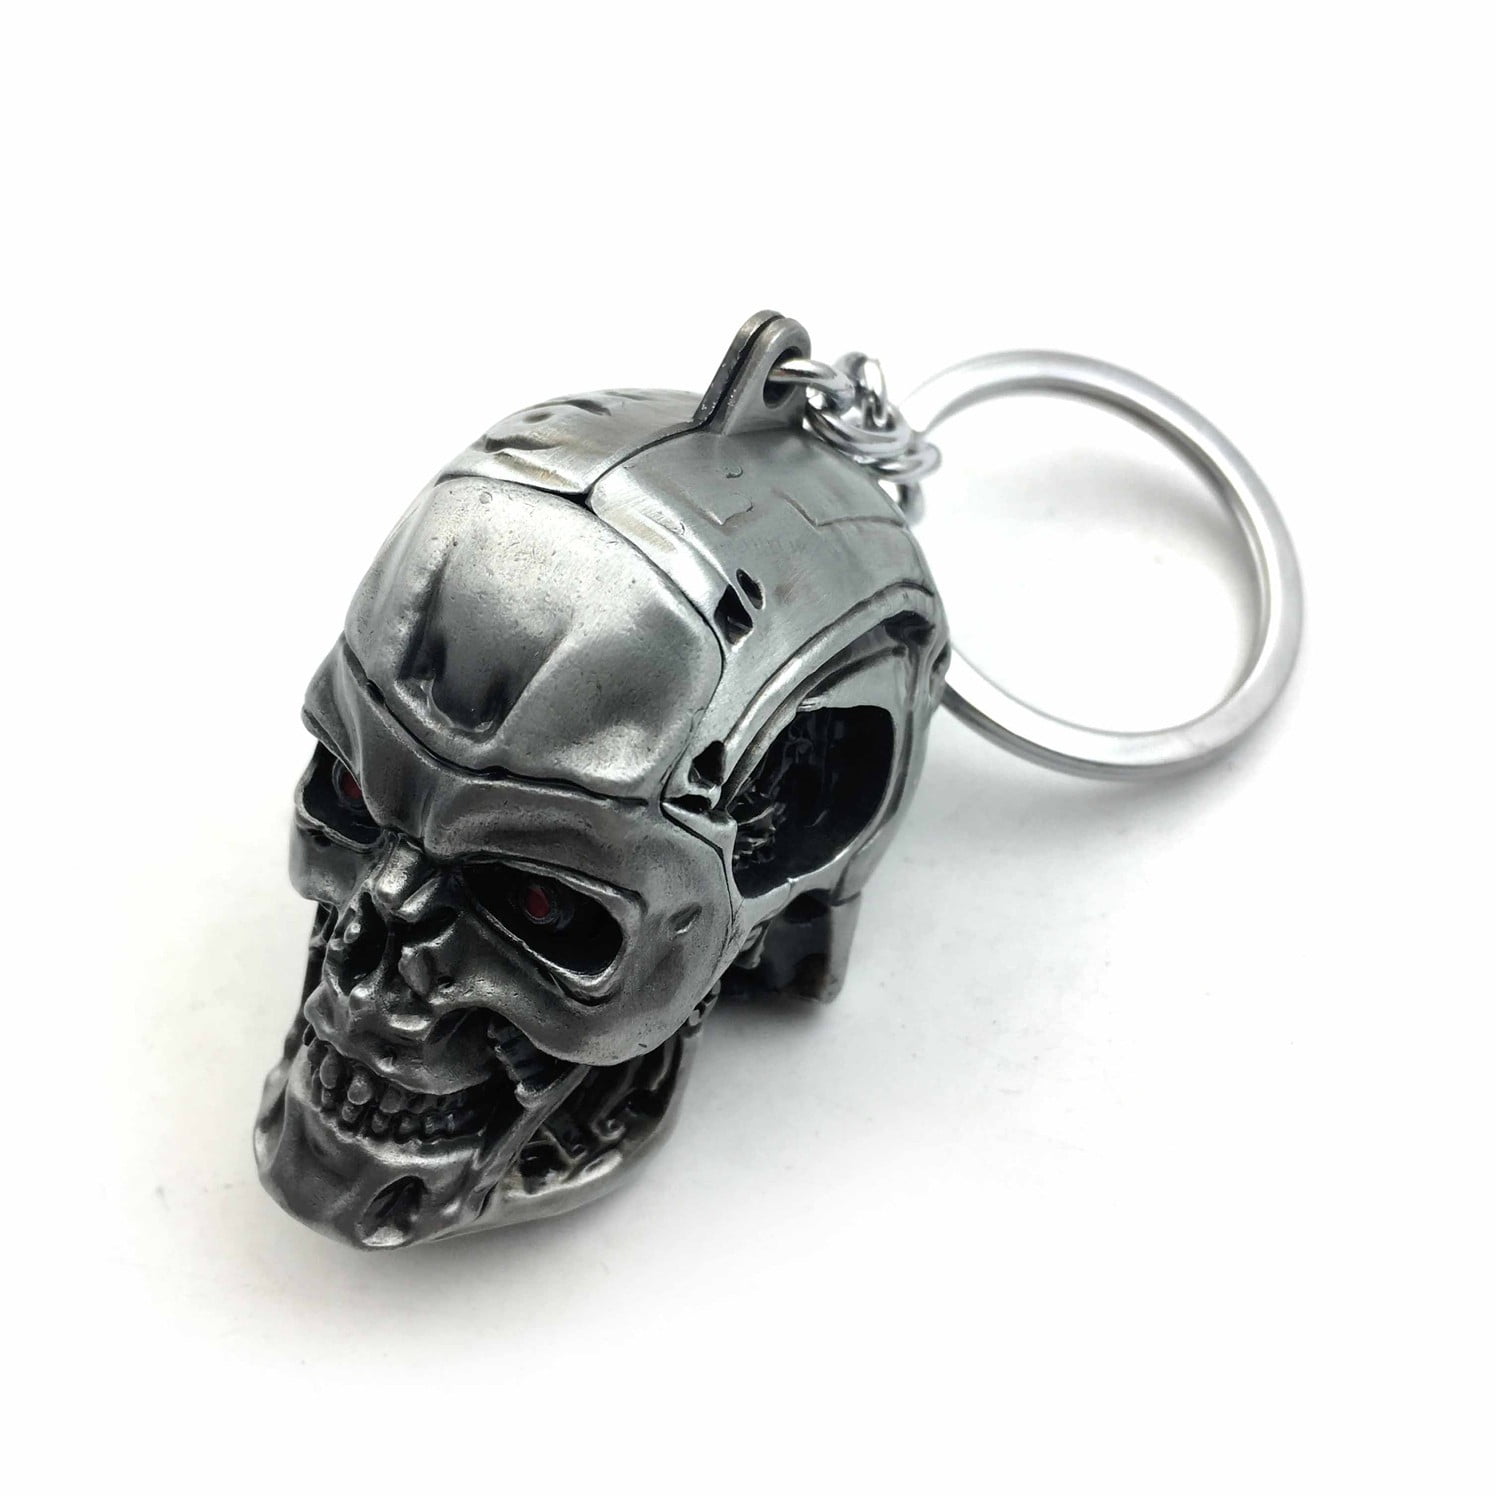 Skull and Motorcycle Rubber Keychain Keyring Keychain Charm Pendant Funny Gift 